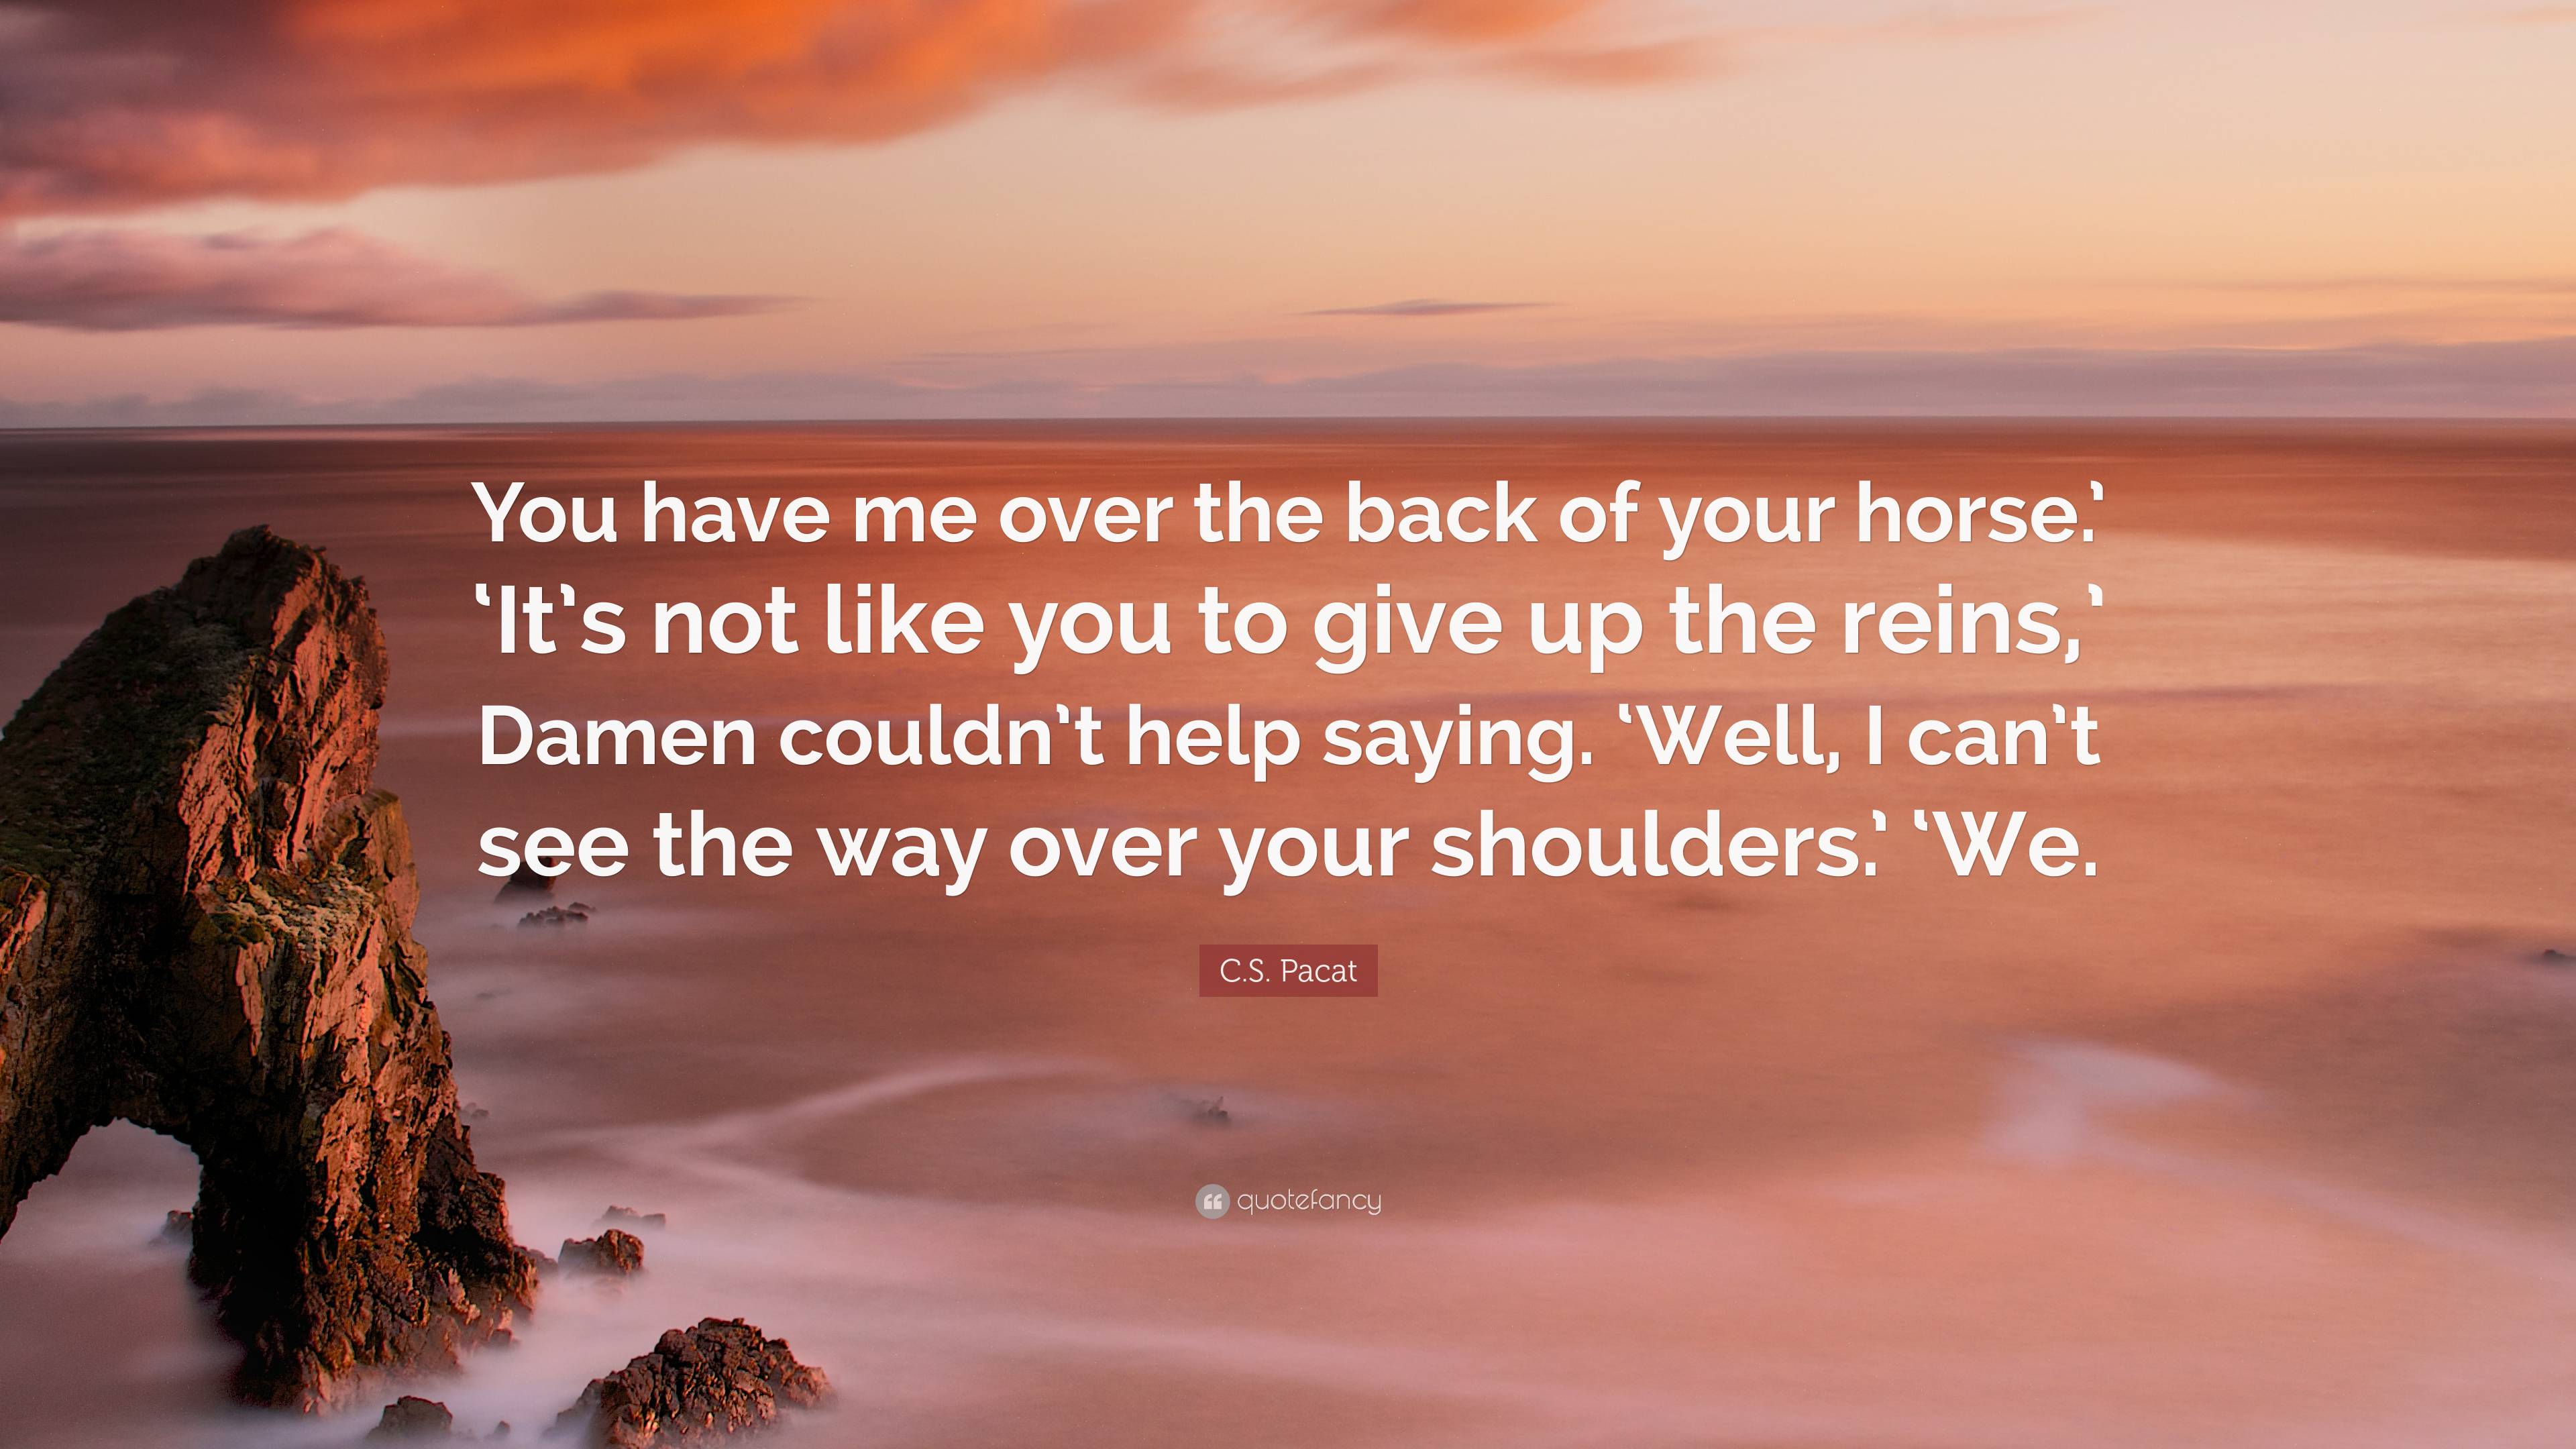 I Got Your Back Quotes To Show Your Support